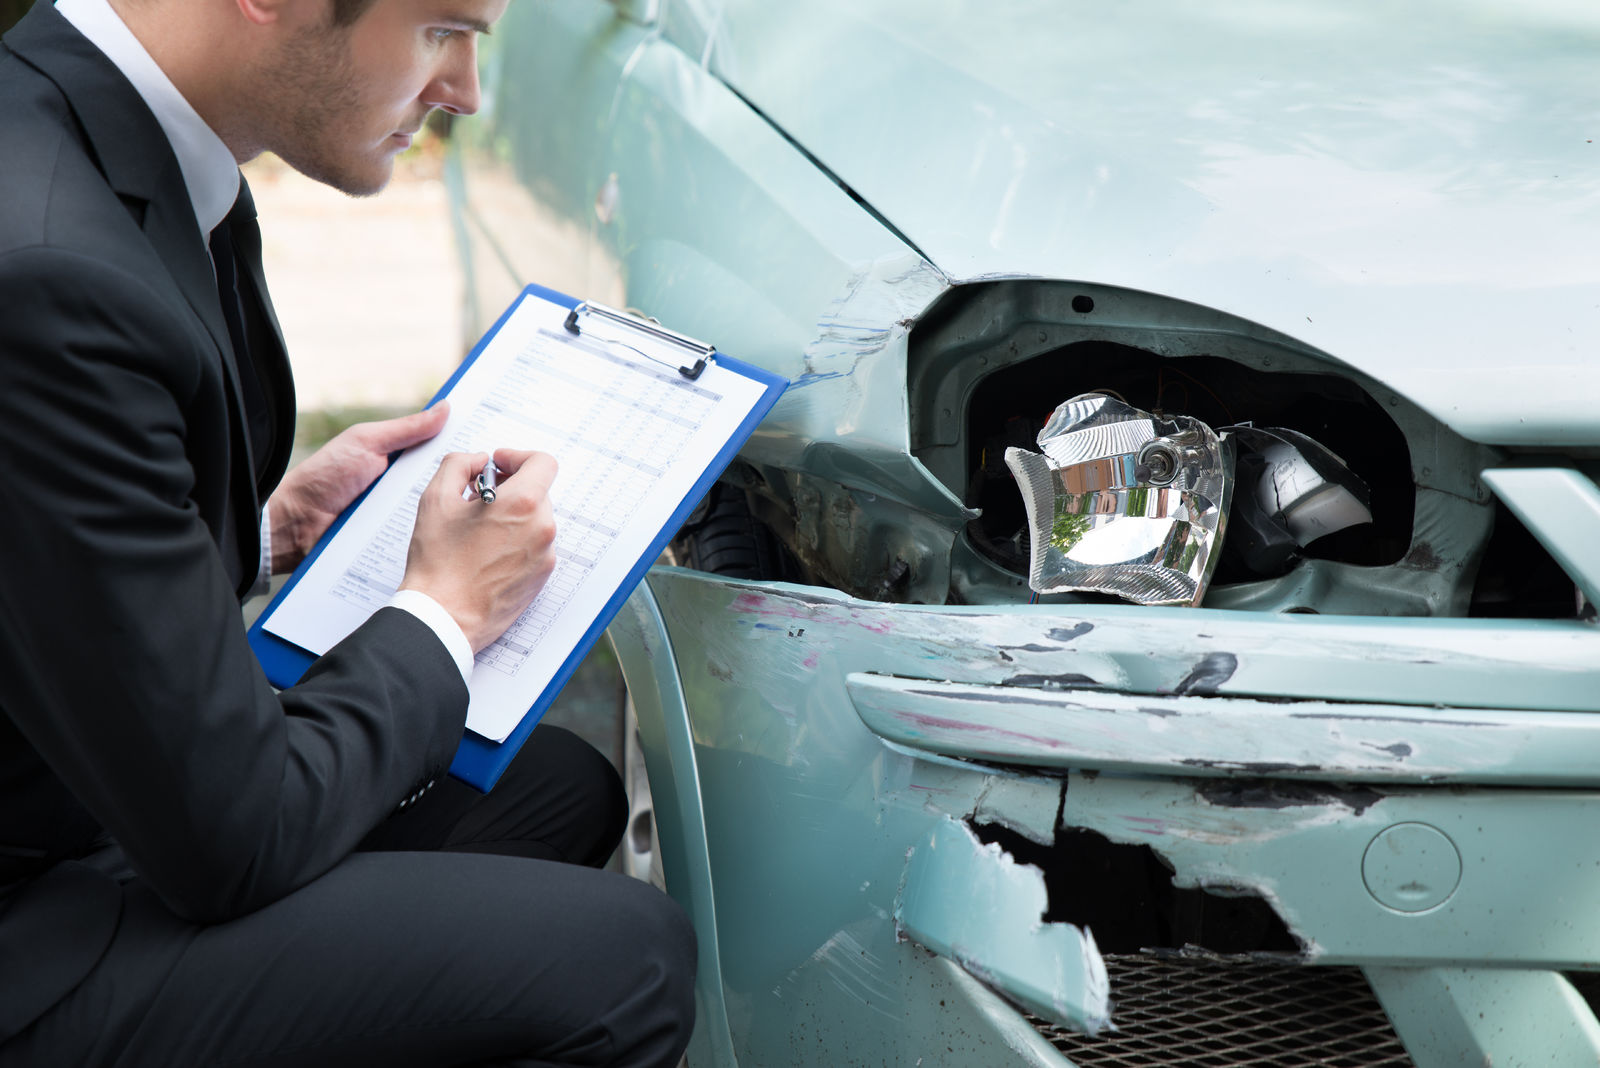 How does gap insurance work when a car is totaled?